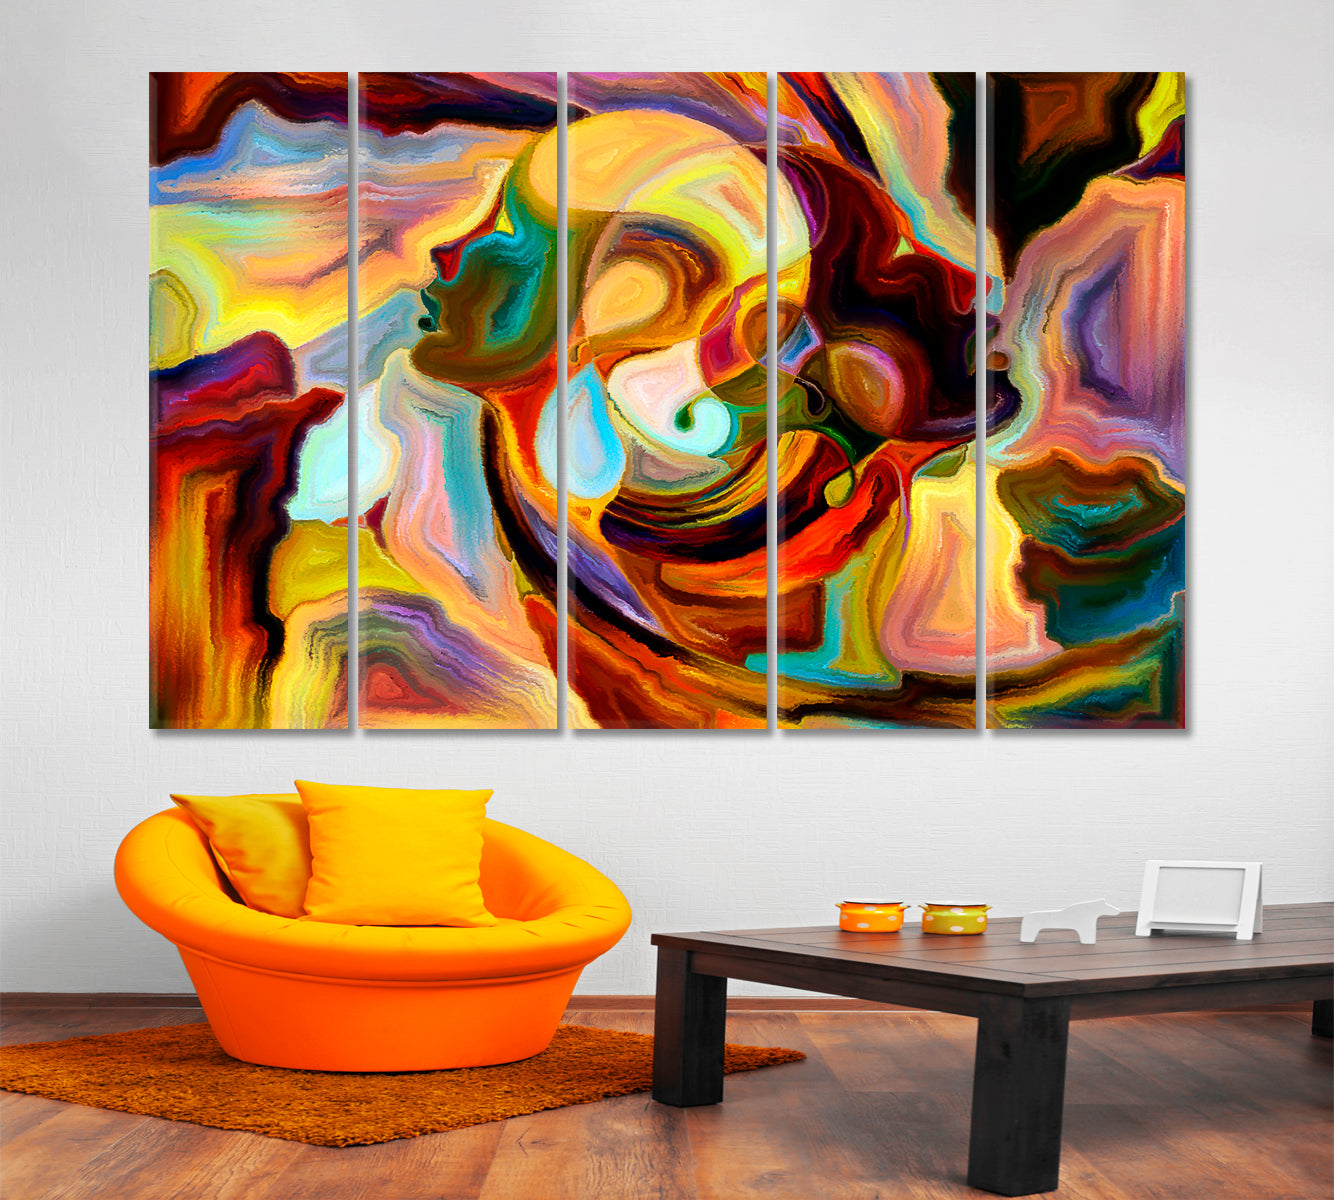 VORTEX MIND Contemporary Abstract Colorful Patterns Contemporary Art Artesty 5 panels 36" x 24" 